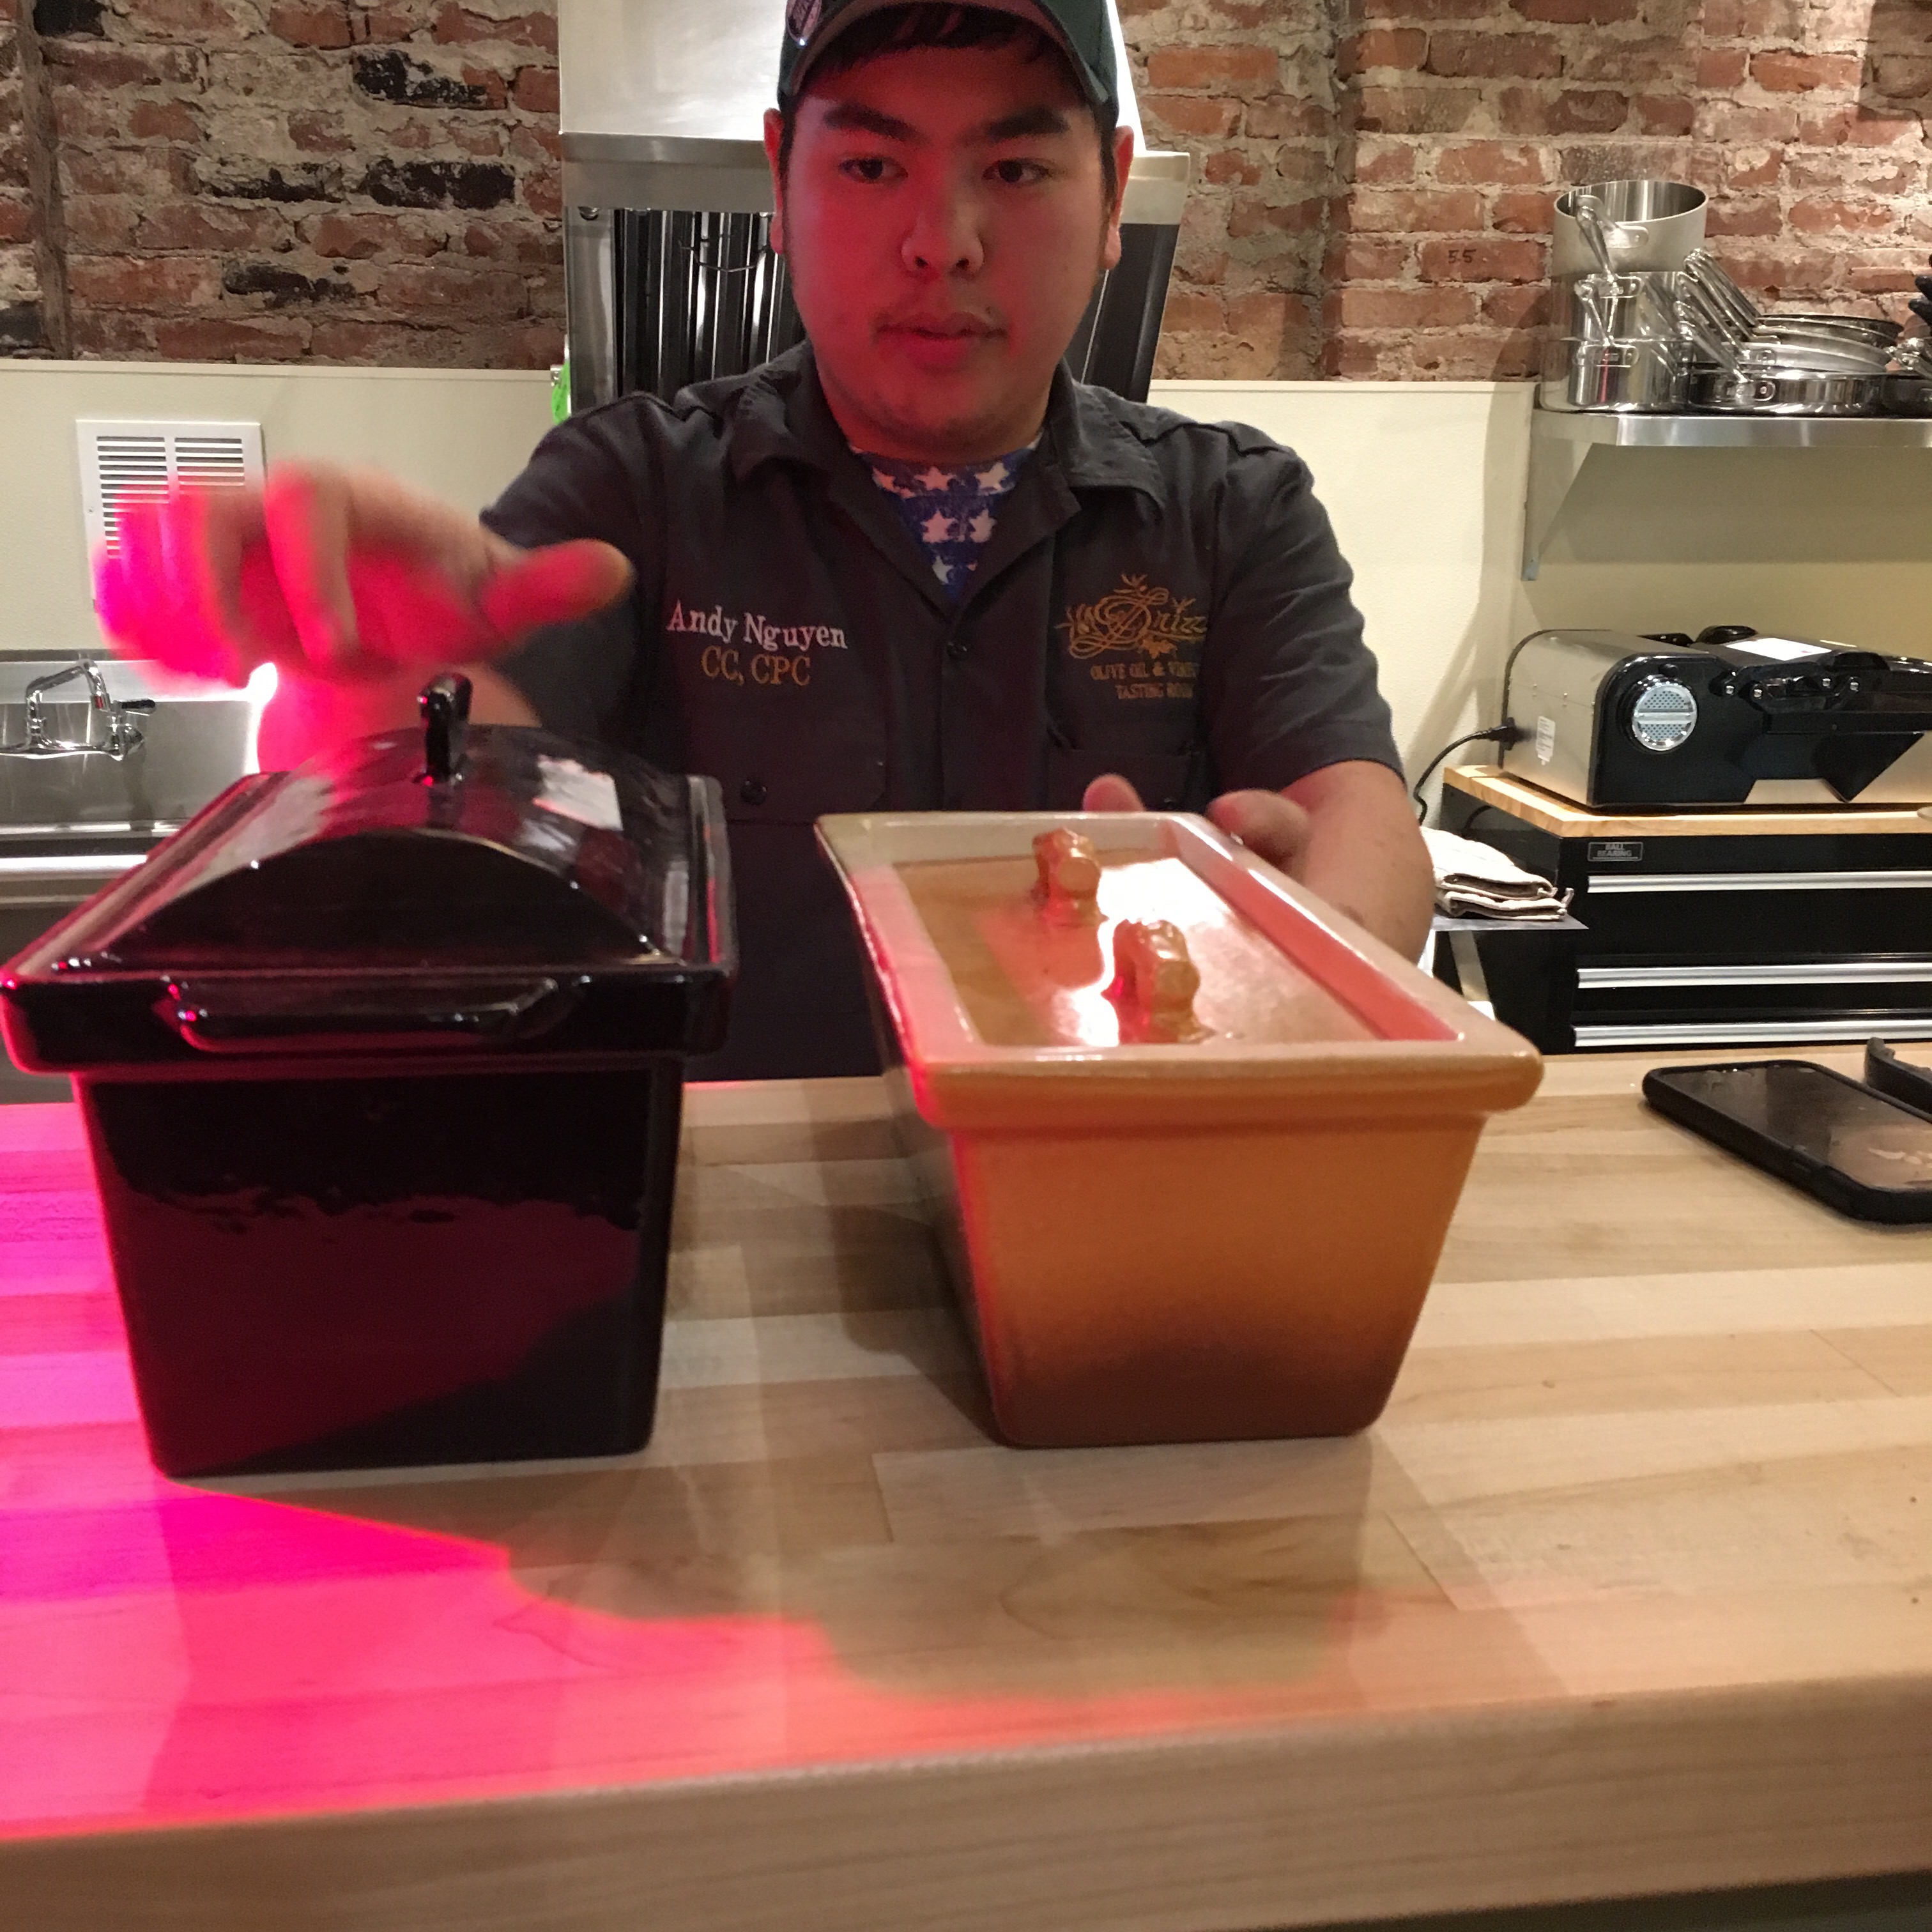 Chef Andy Nguyen shows off some of his vintage old world terrine molds, a personal passion and expertise he will share in the kitchen at Drizzle Lynden